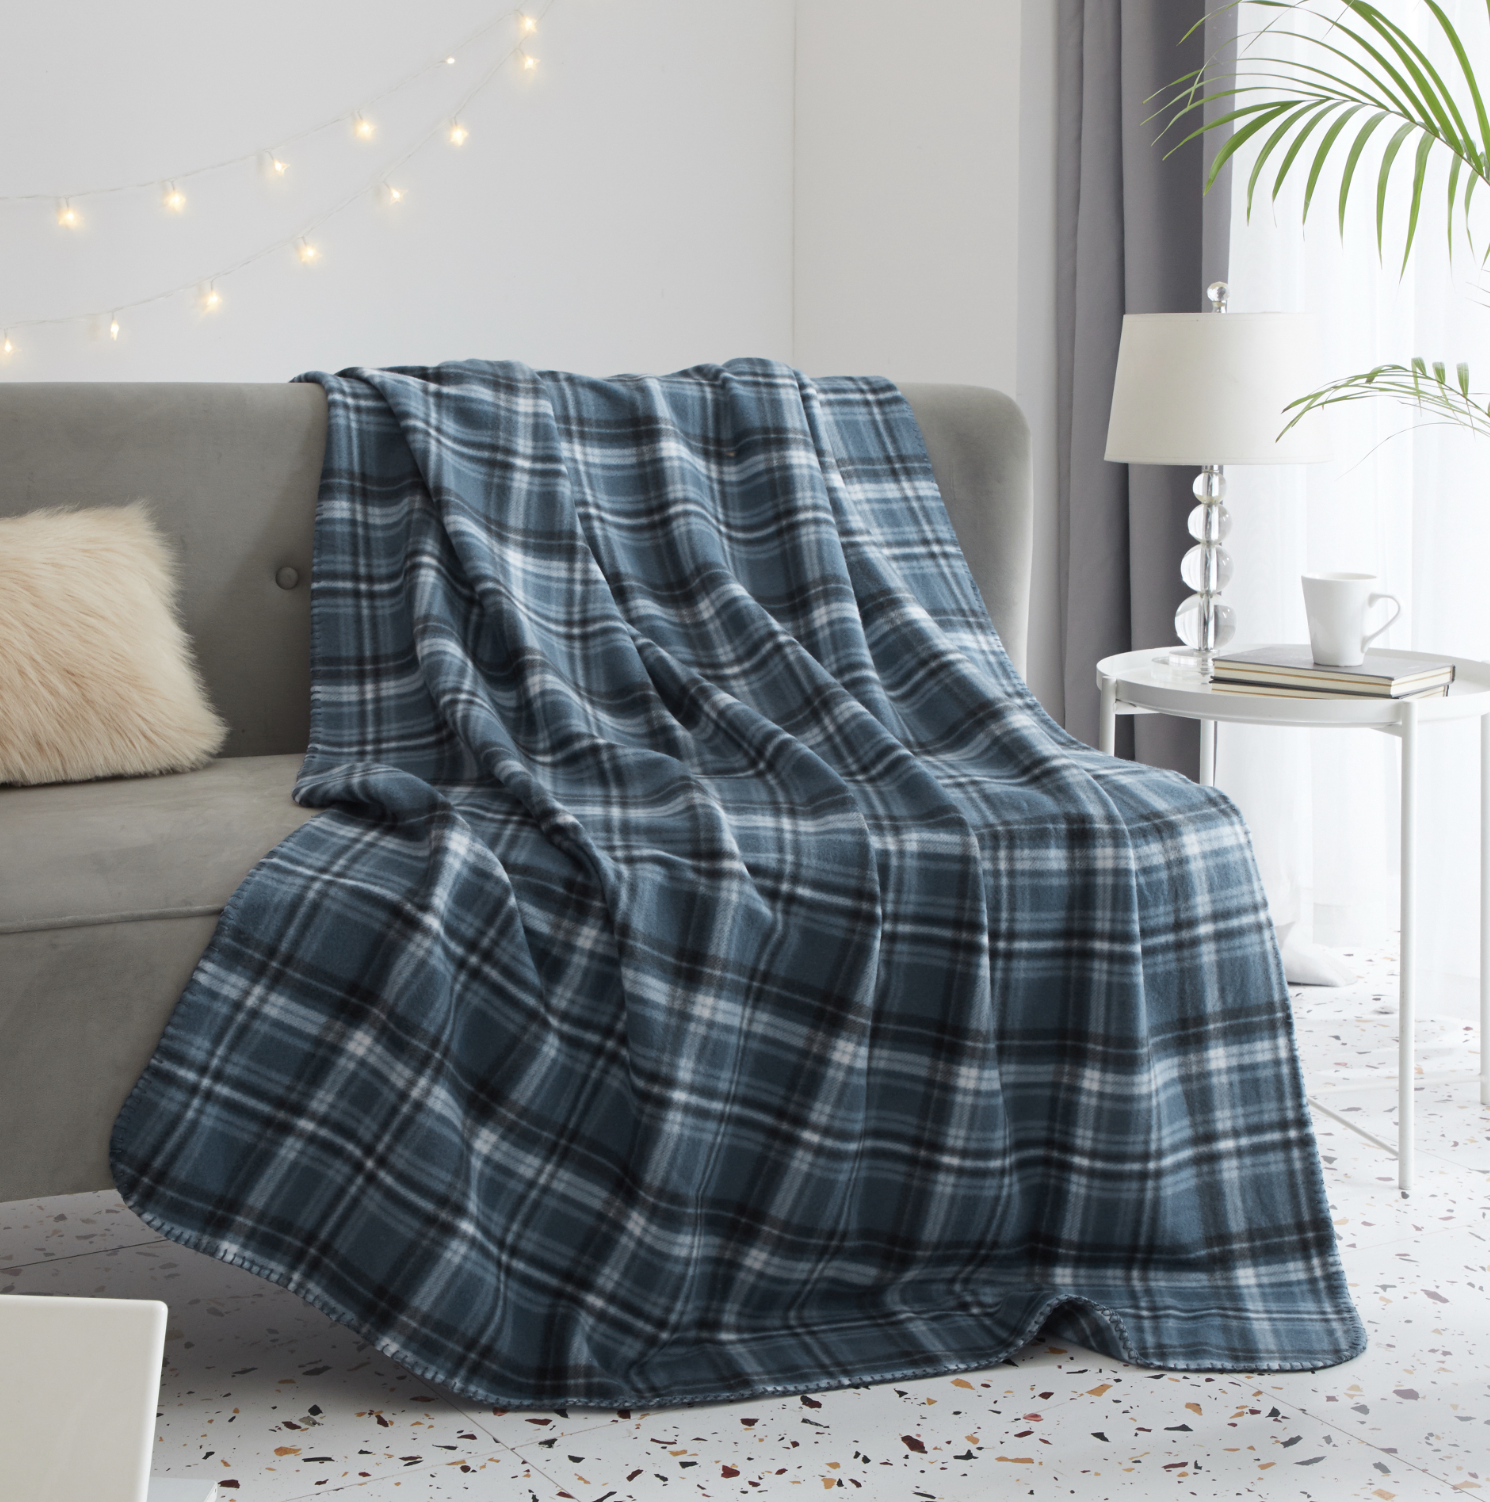 the green and black plaid blanket